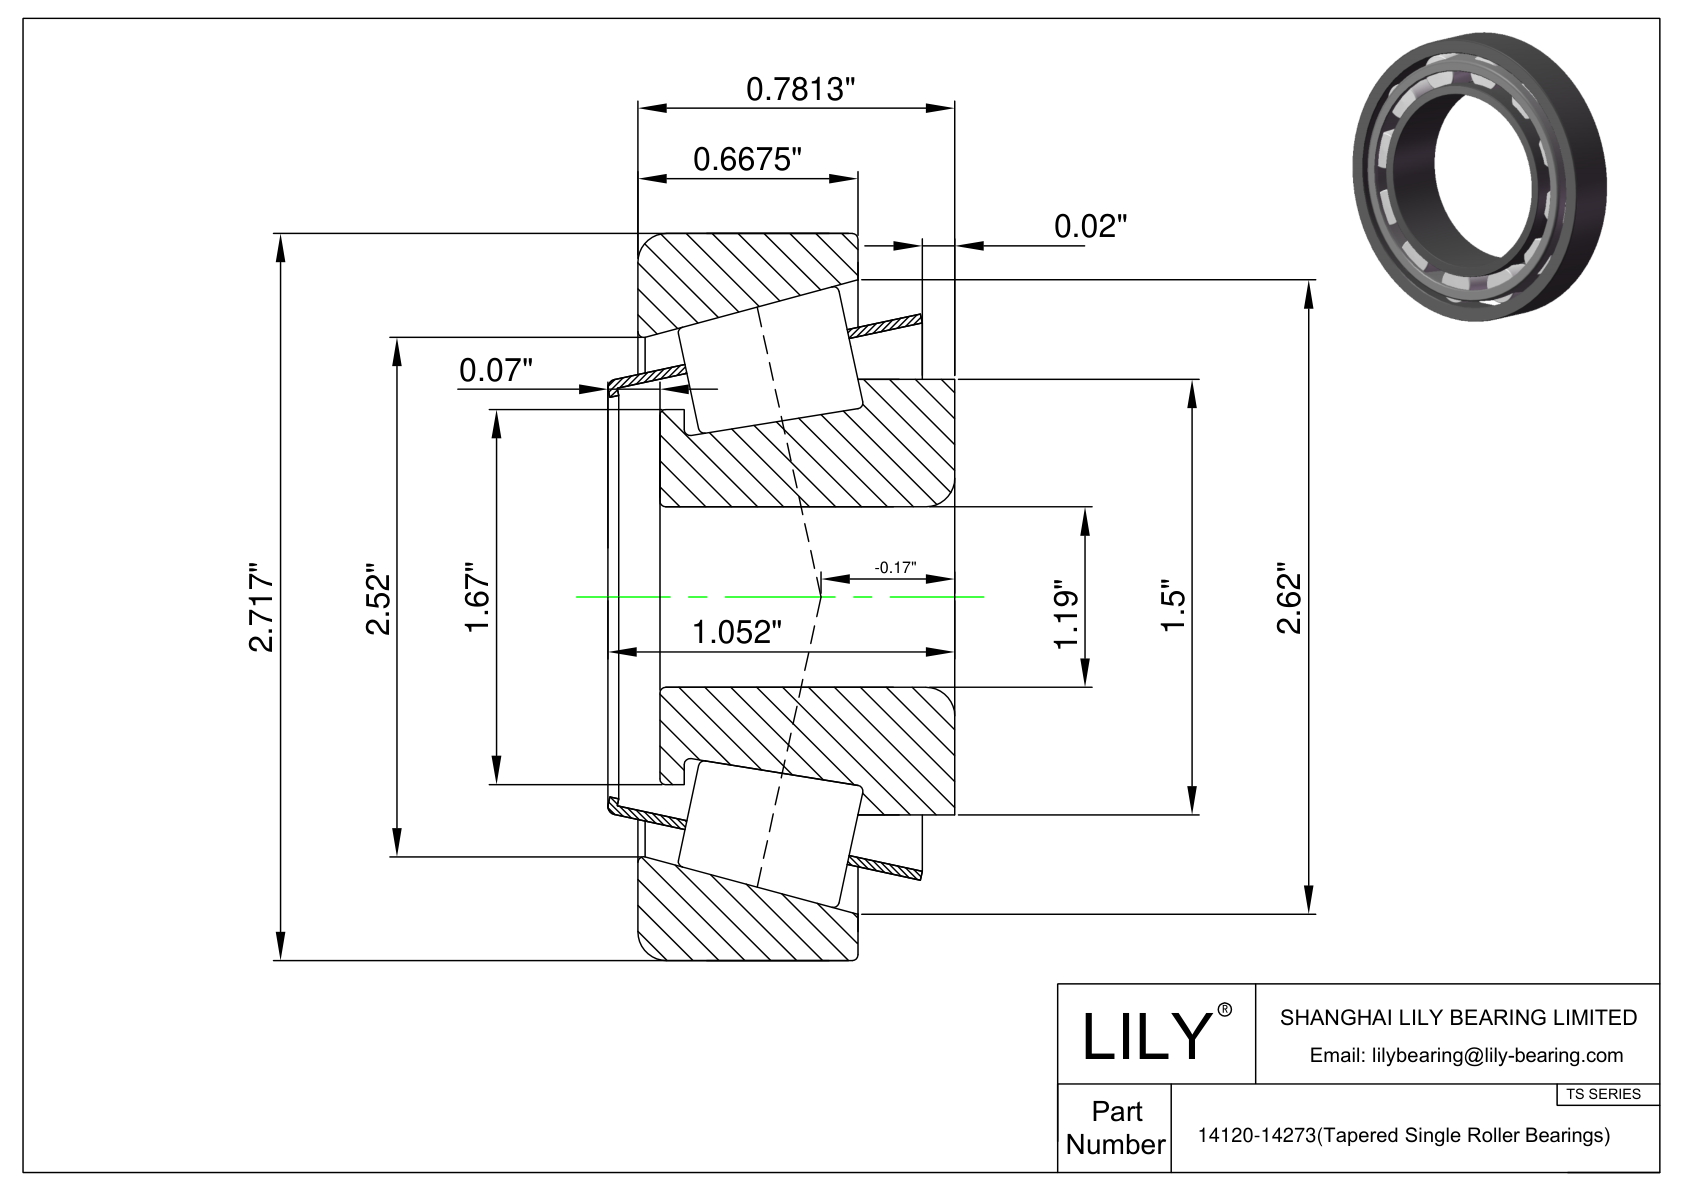 14119A-14299 TS (Tapered Single Roller Bearings) (Imperial) cad drawing